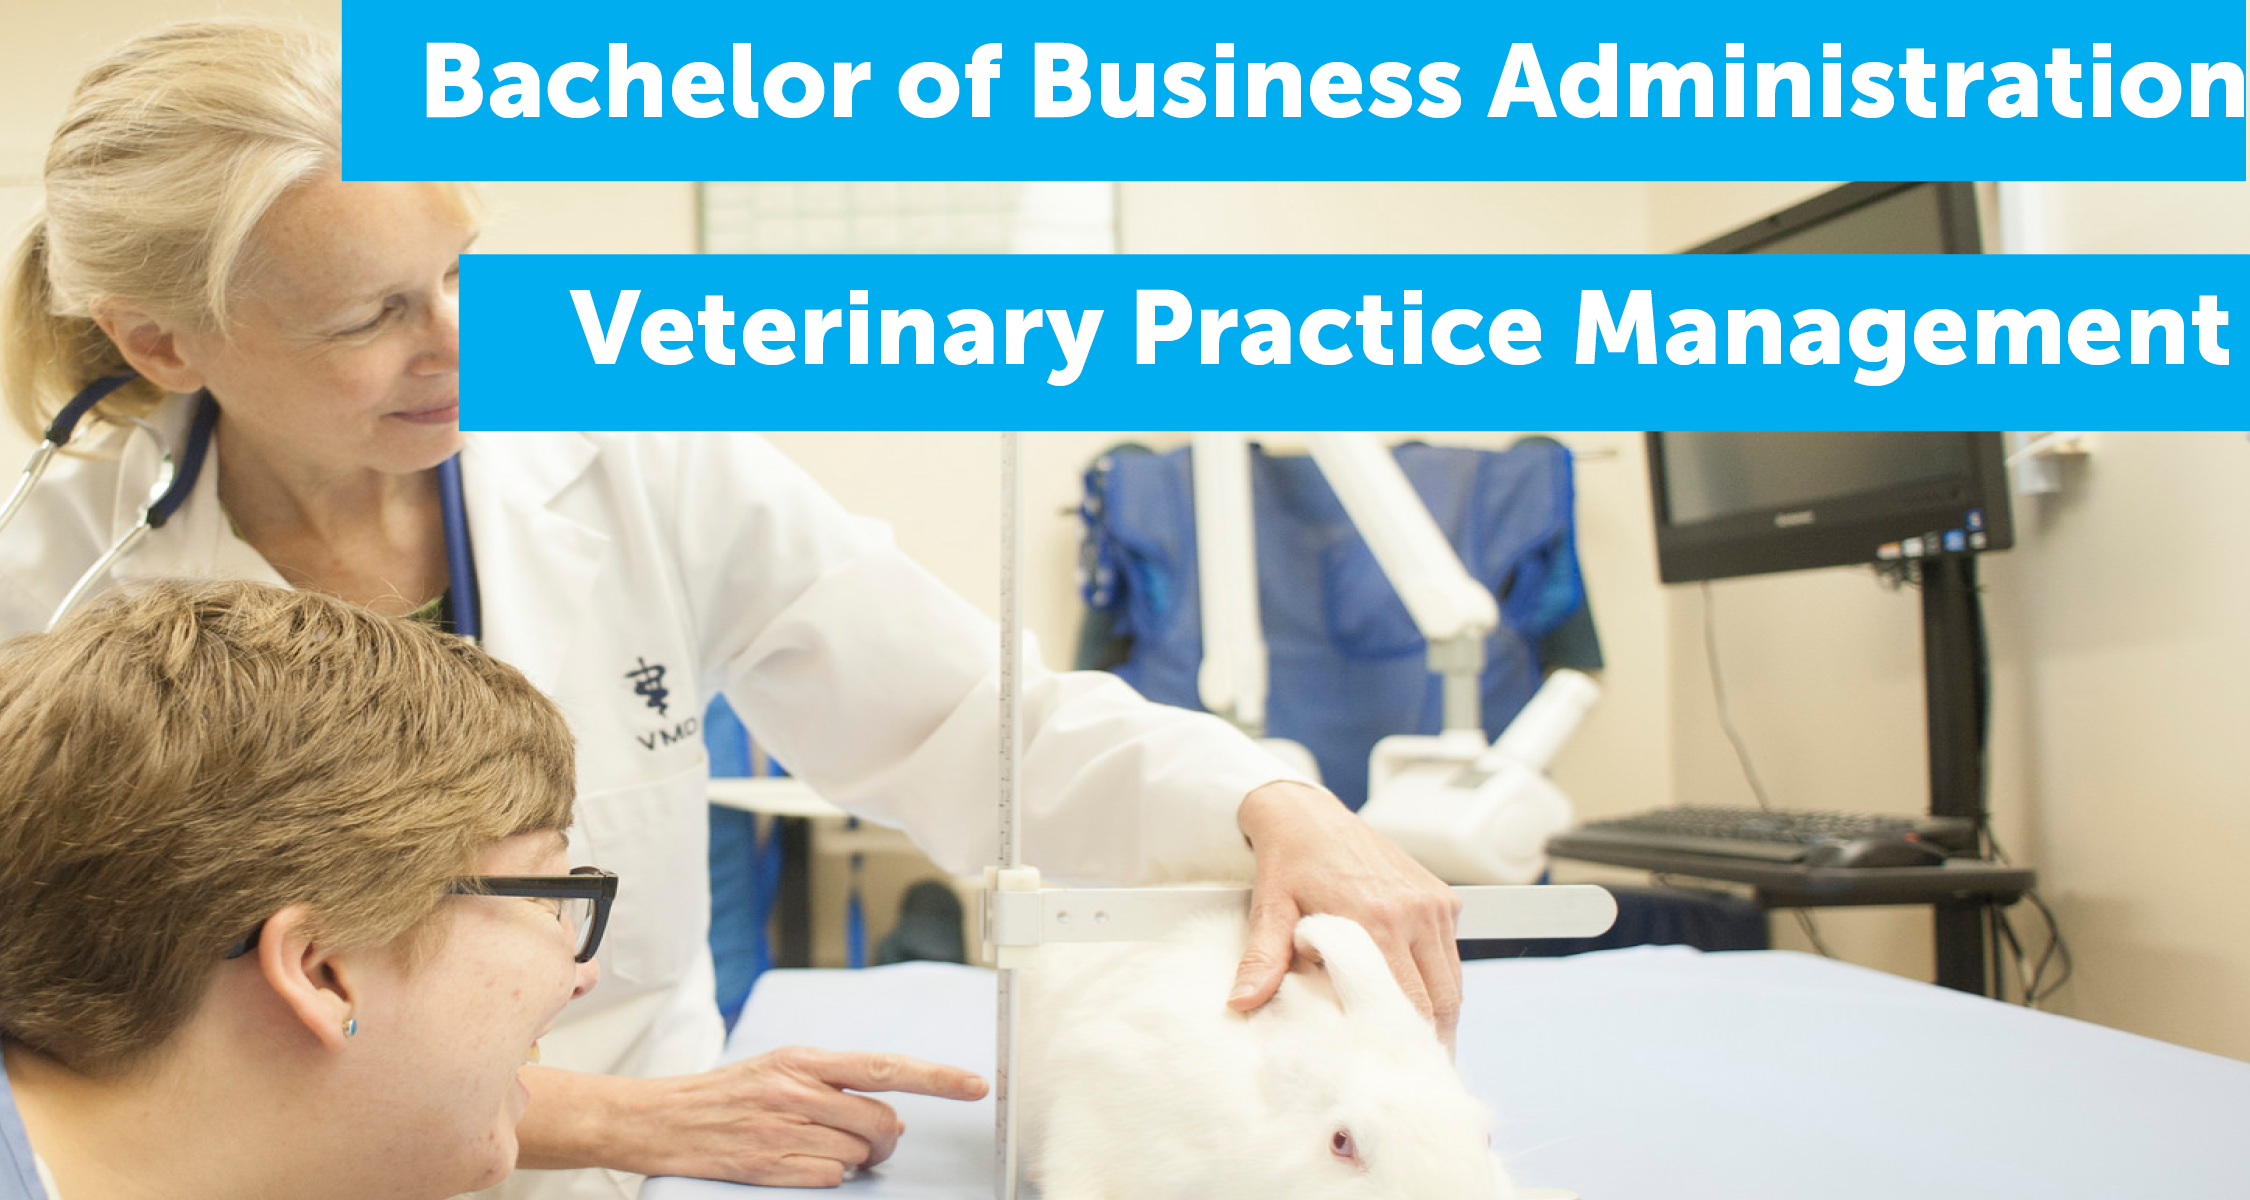 Manor college now offers a B.B.A in Veterinary Practice Management. 